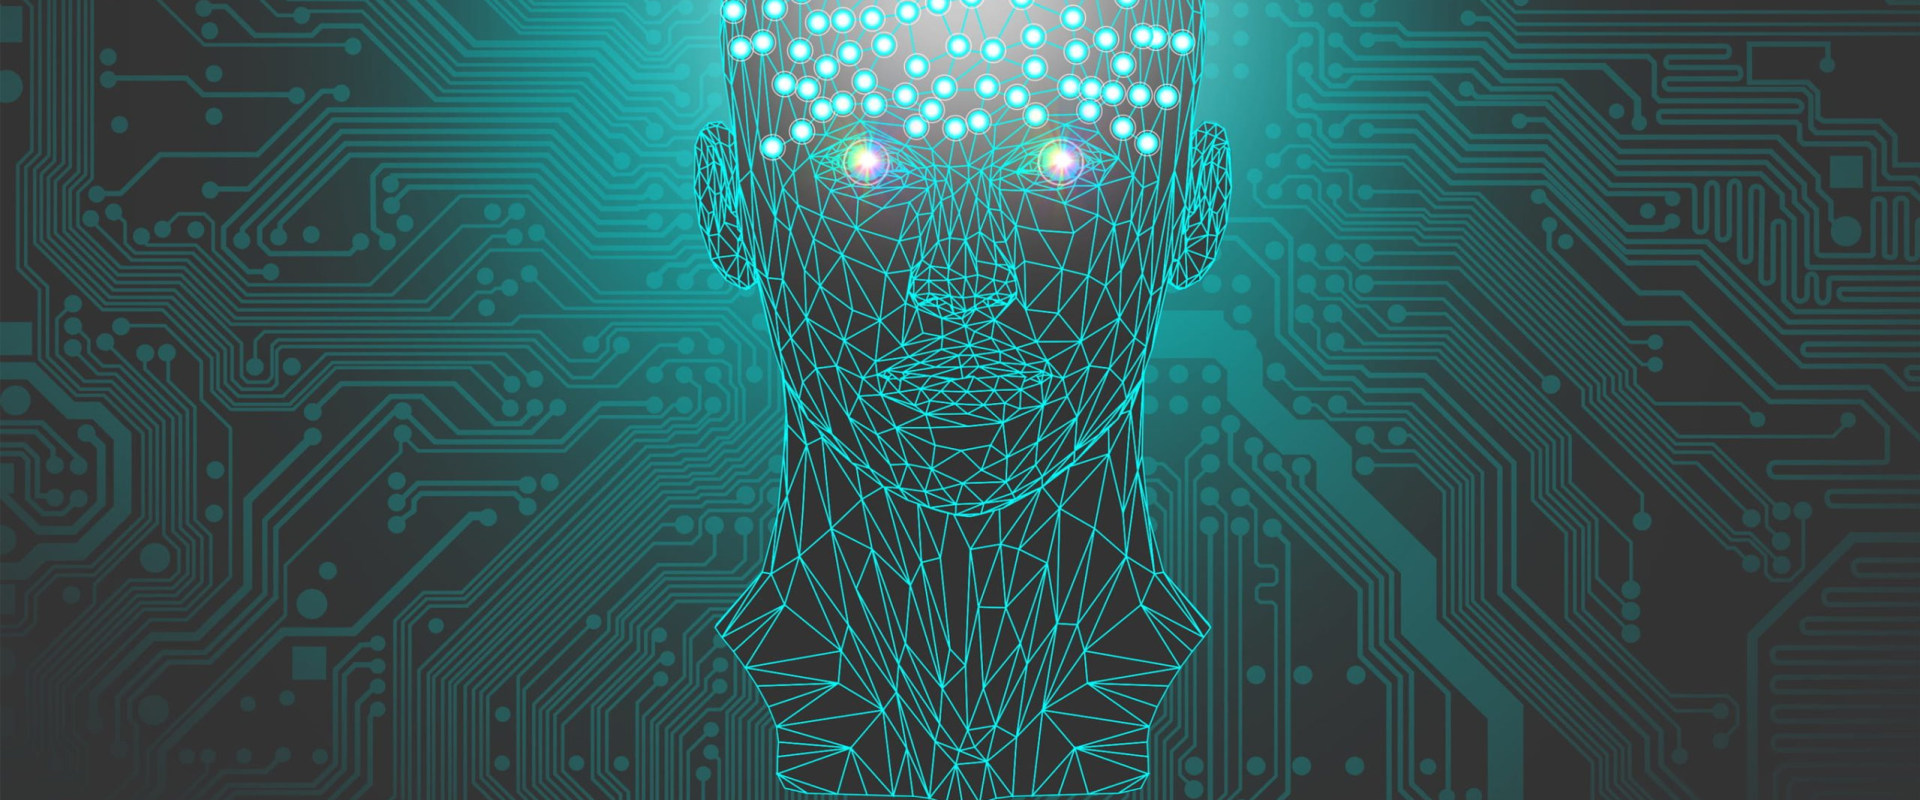 Unlocking the Potential of Artificial Intelligence for Society